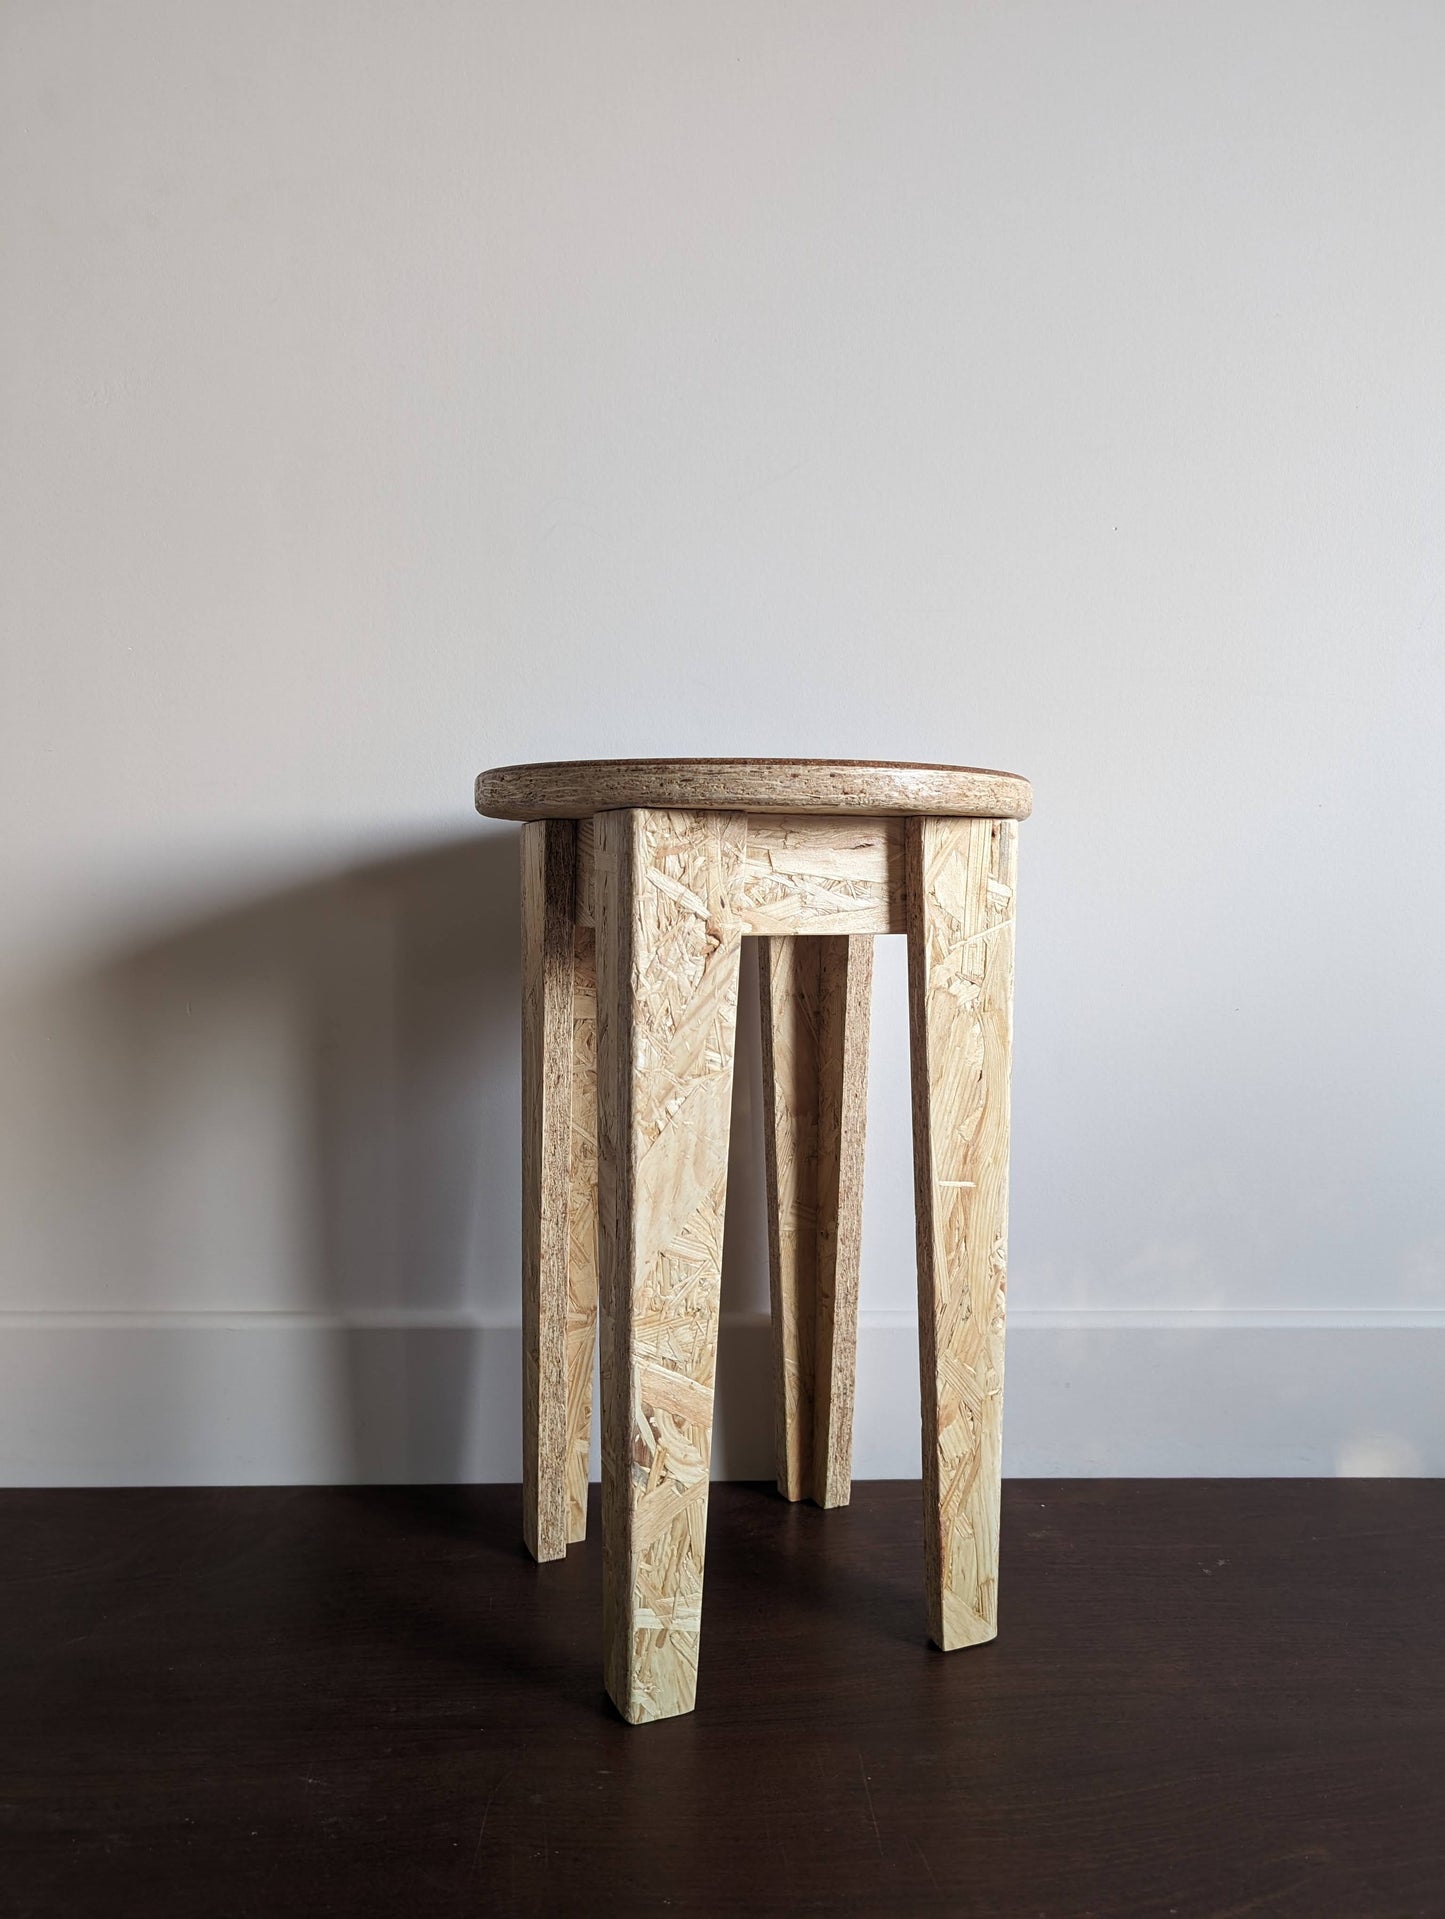 The stool in OSB